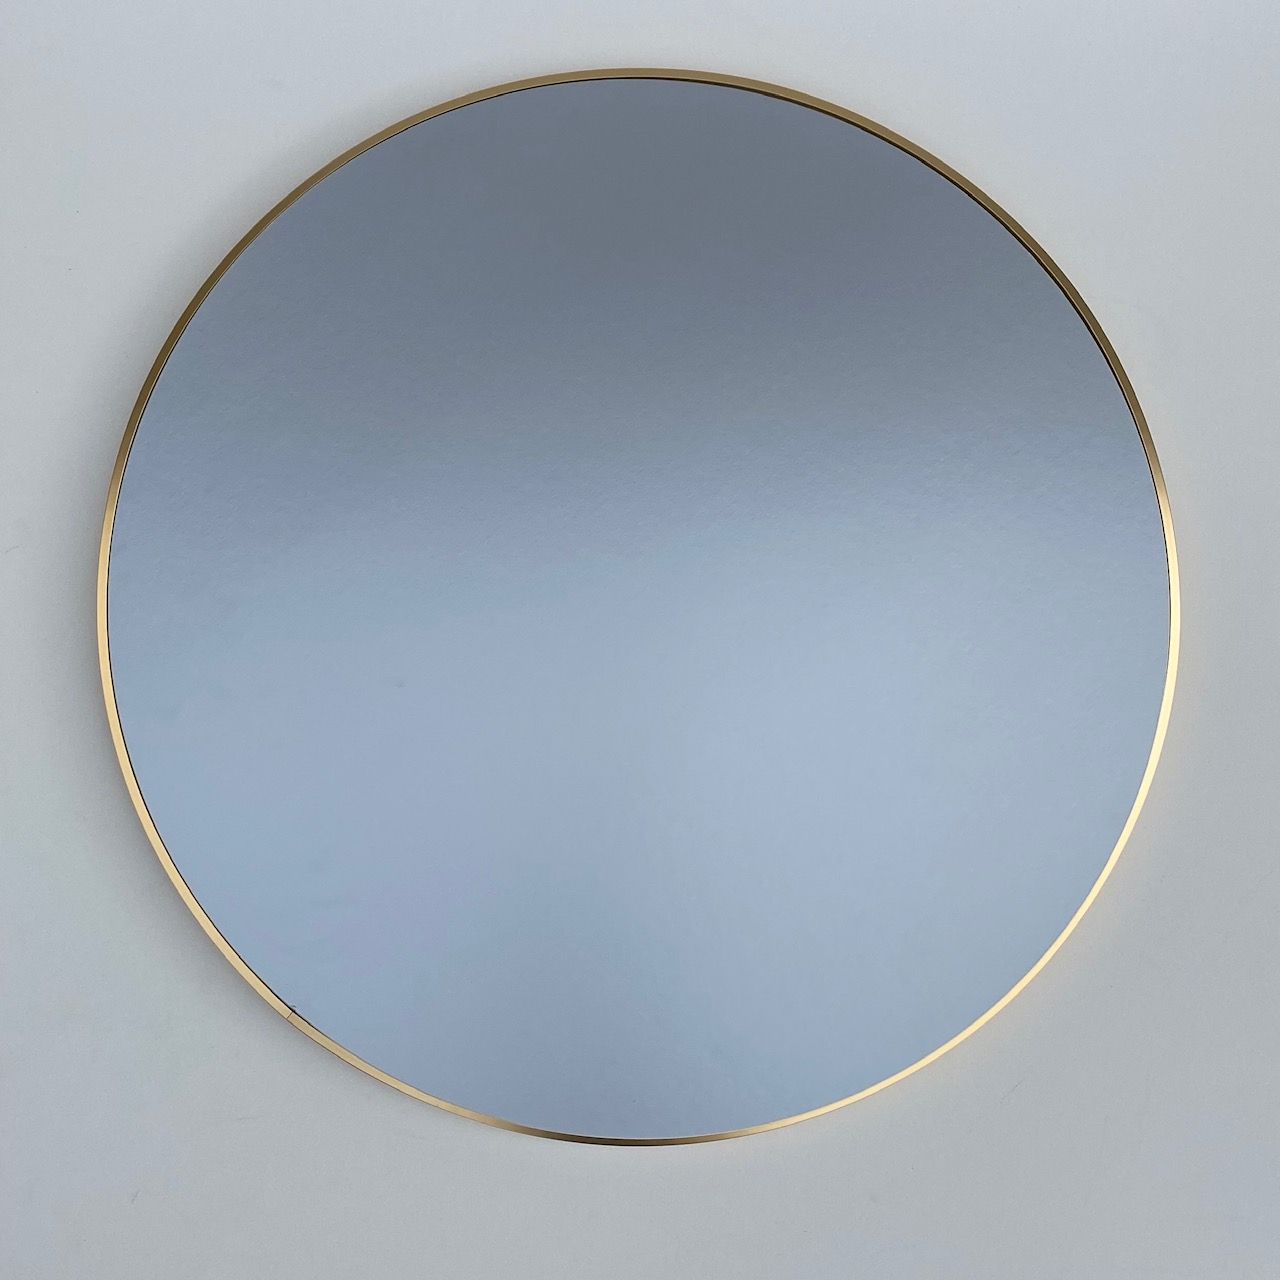 Famous Gold Round Aluminum Framed Mirror – Artsource Within Gold Rounded Corner Wall Mirrors (View 7 of 15)